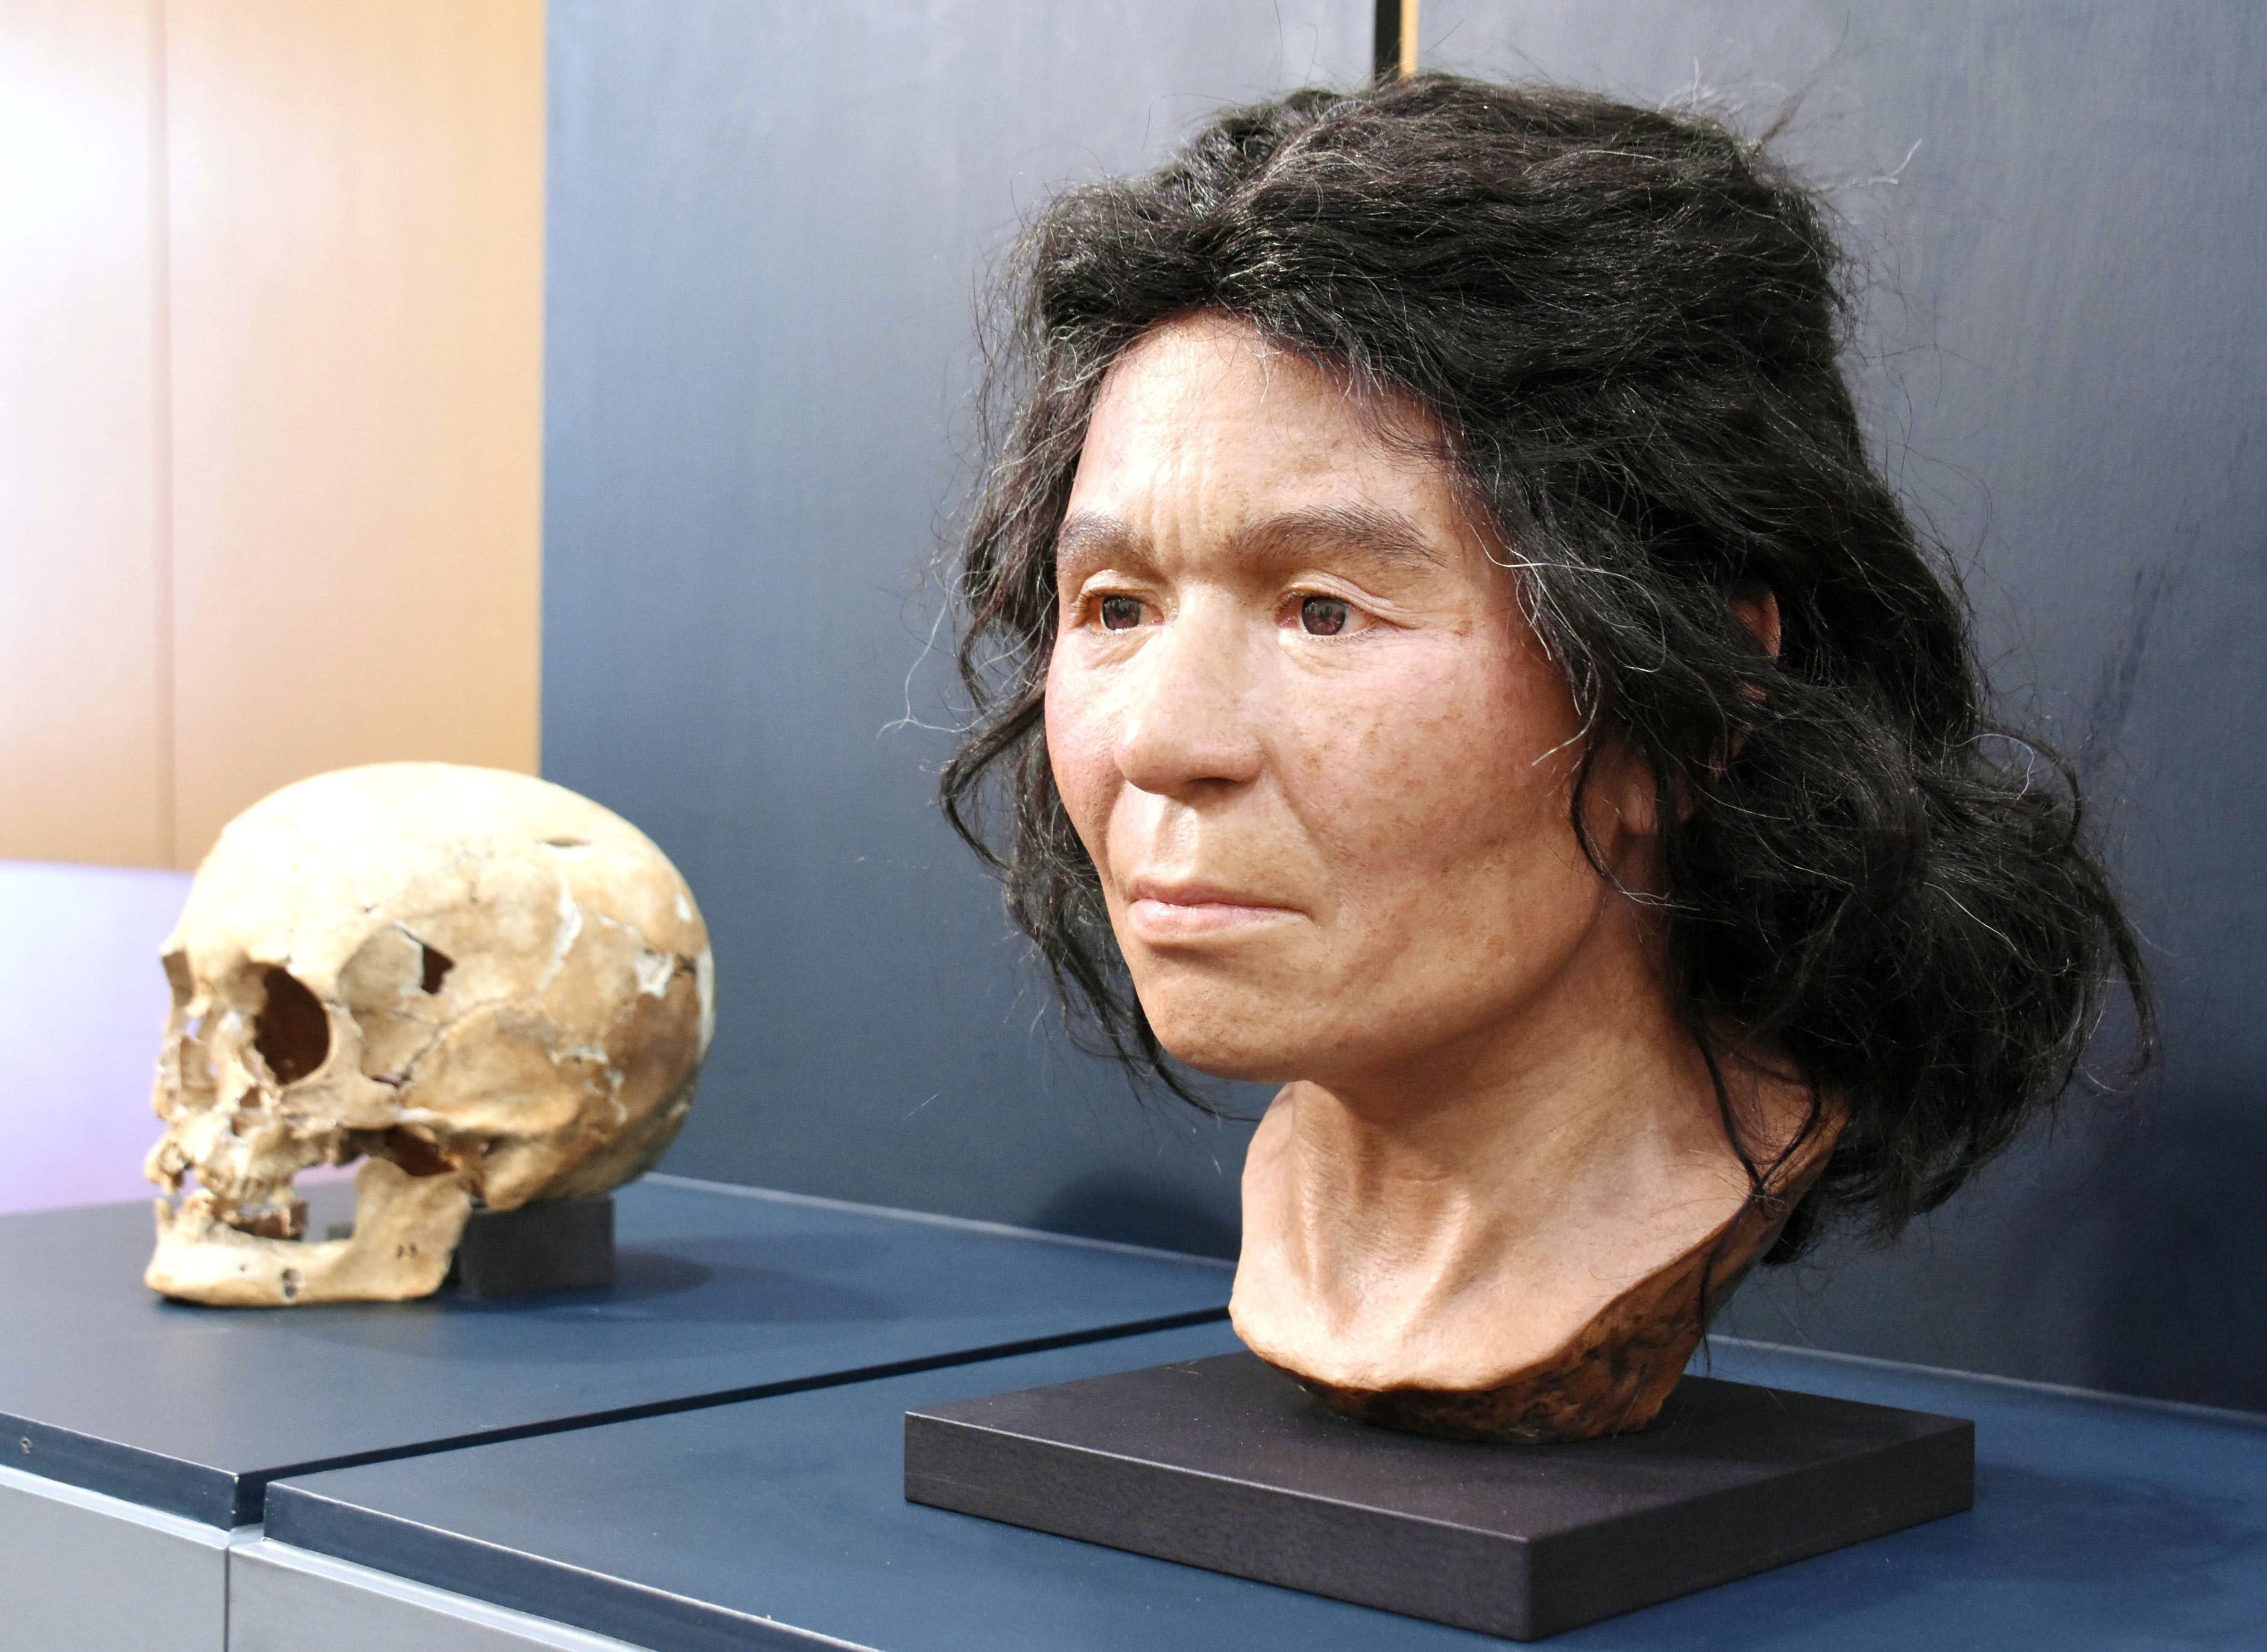 A woman’s skull from Japan’s prehistoric Jomon period, unearthed in Hokkaido, and a model face reproduced with the use of DNA technology. Photo: Getty Images